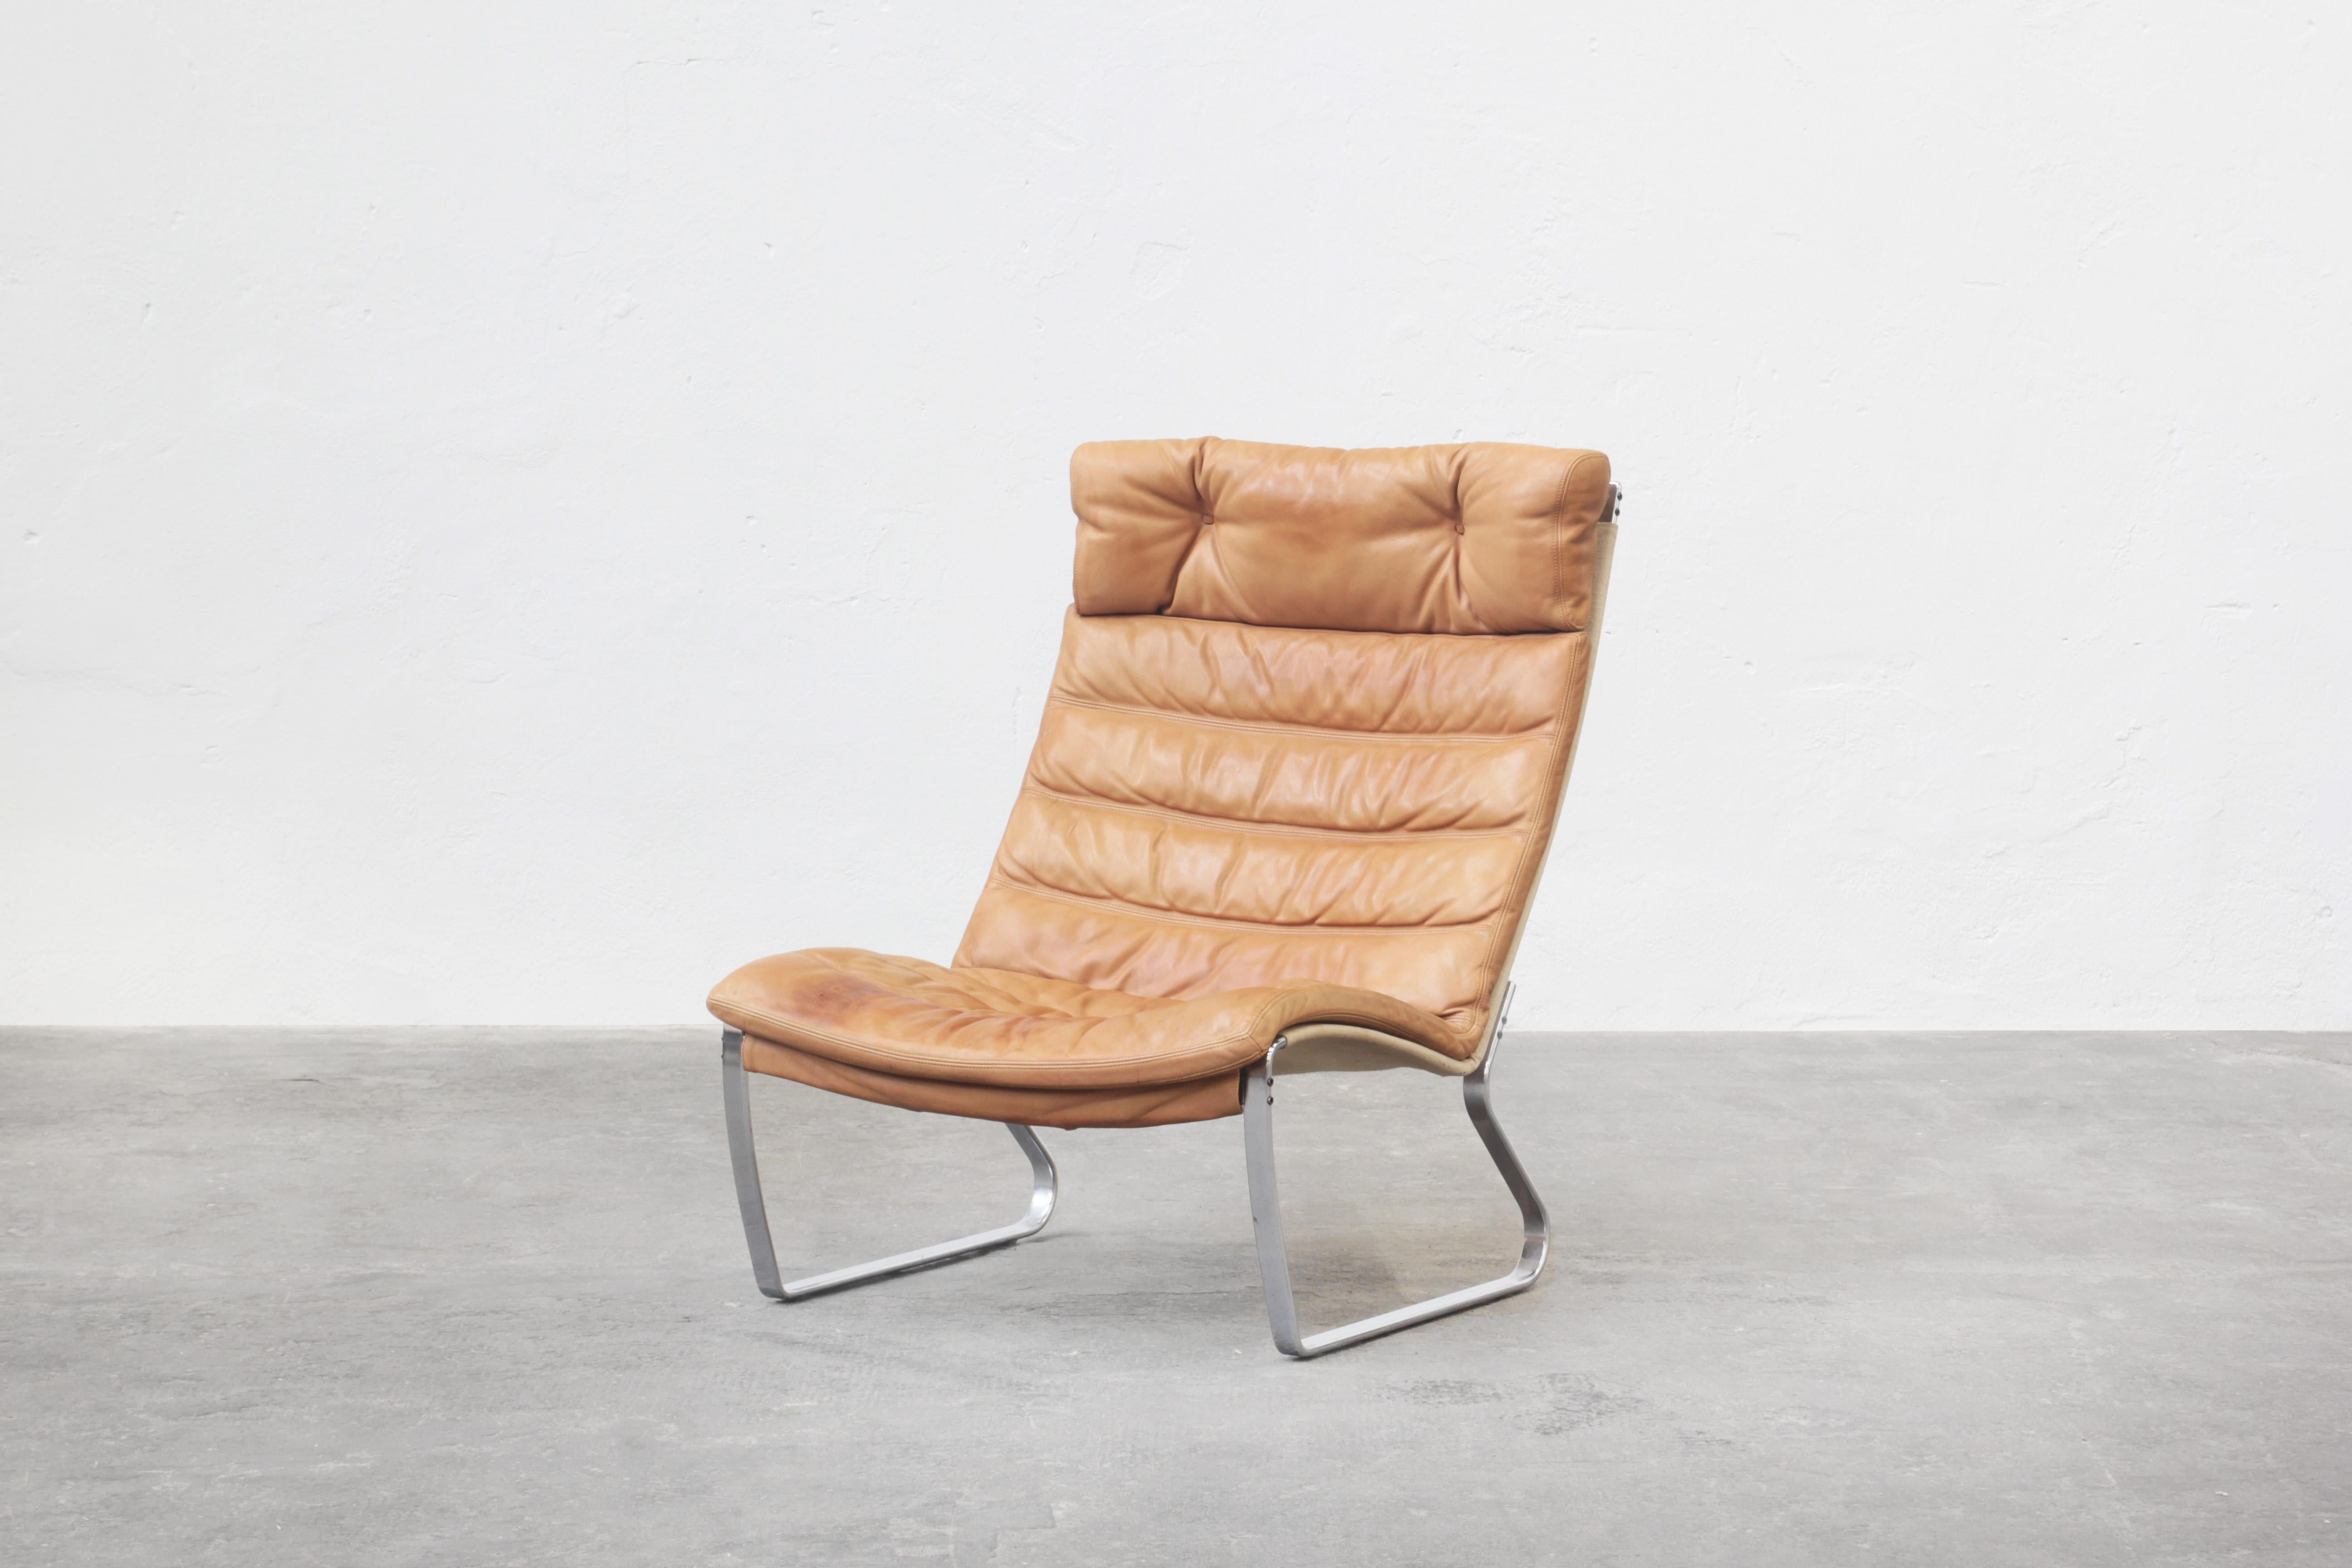 Very beautiful and rare lounge chair by Jørgen Kastholm for Kill International in the 1960s, Germany.
The chair is still in beautiful and original condition, made out of steel and patinated leather in cognac-brown. Ready for usage!